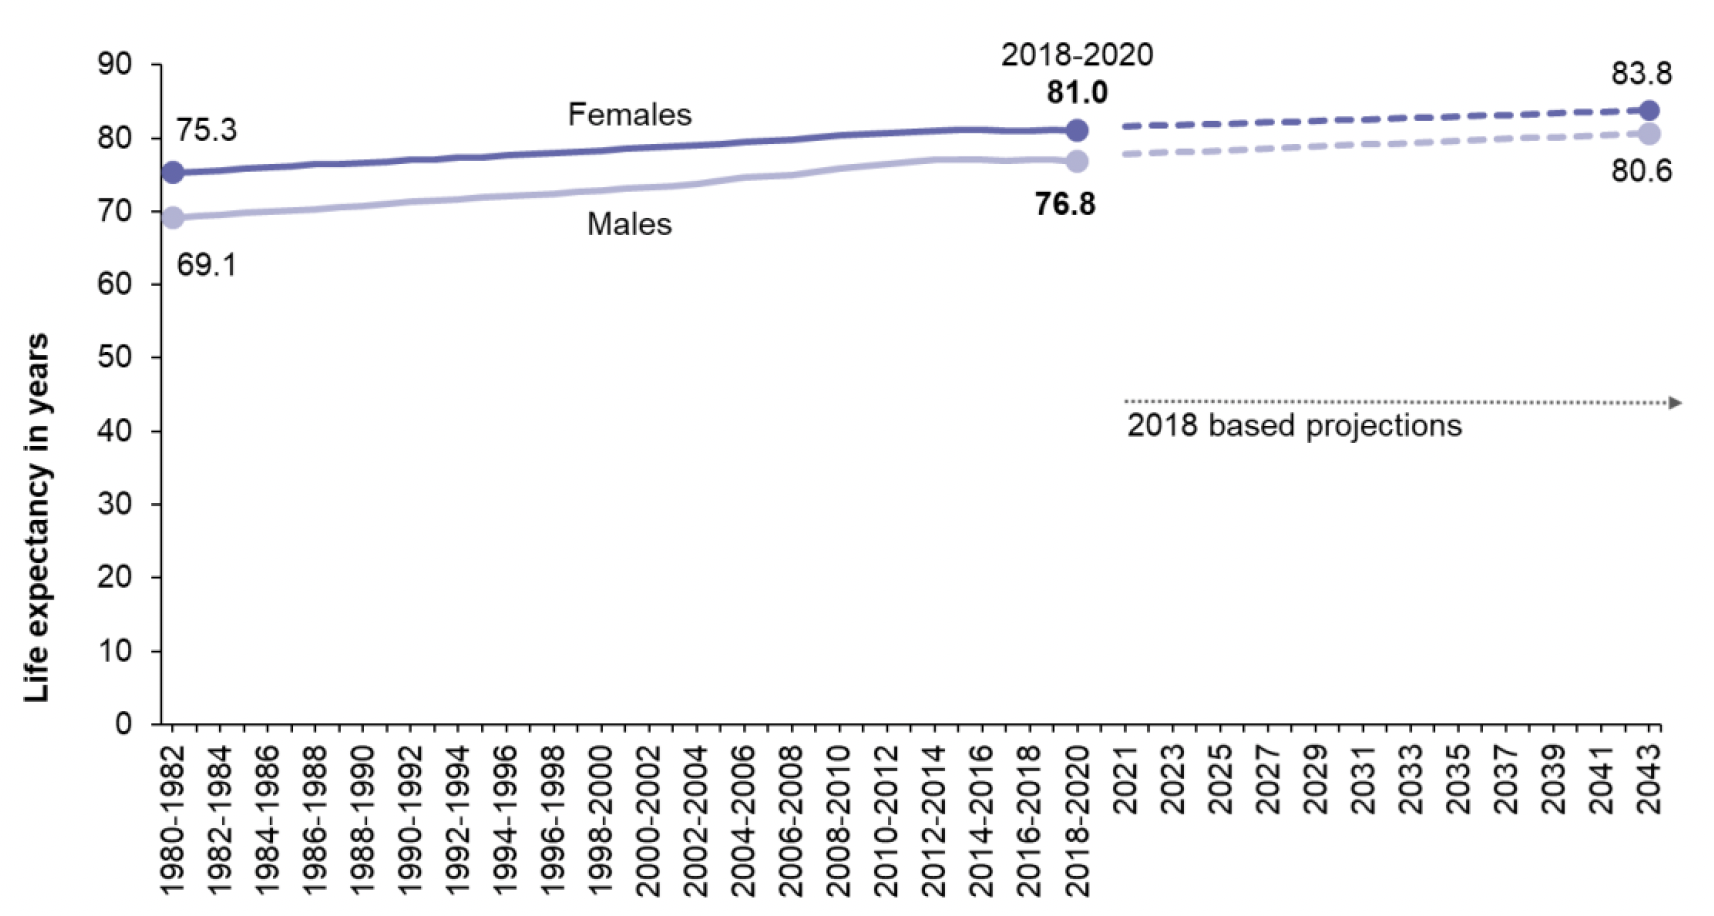 Line chart showing life expectancy at birth from 1980-1982 and projections to 2043. 
Life expectancy increased by 7.7 years for males and 5.7 years for females between 1980-1982 and 2018-2020
Life expectancy projections suggest the rate of increase will slow to 3.8 years for males and 2.8 years for females between 2018-2020 and 2043.
